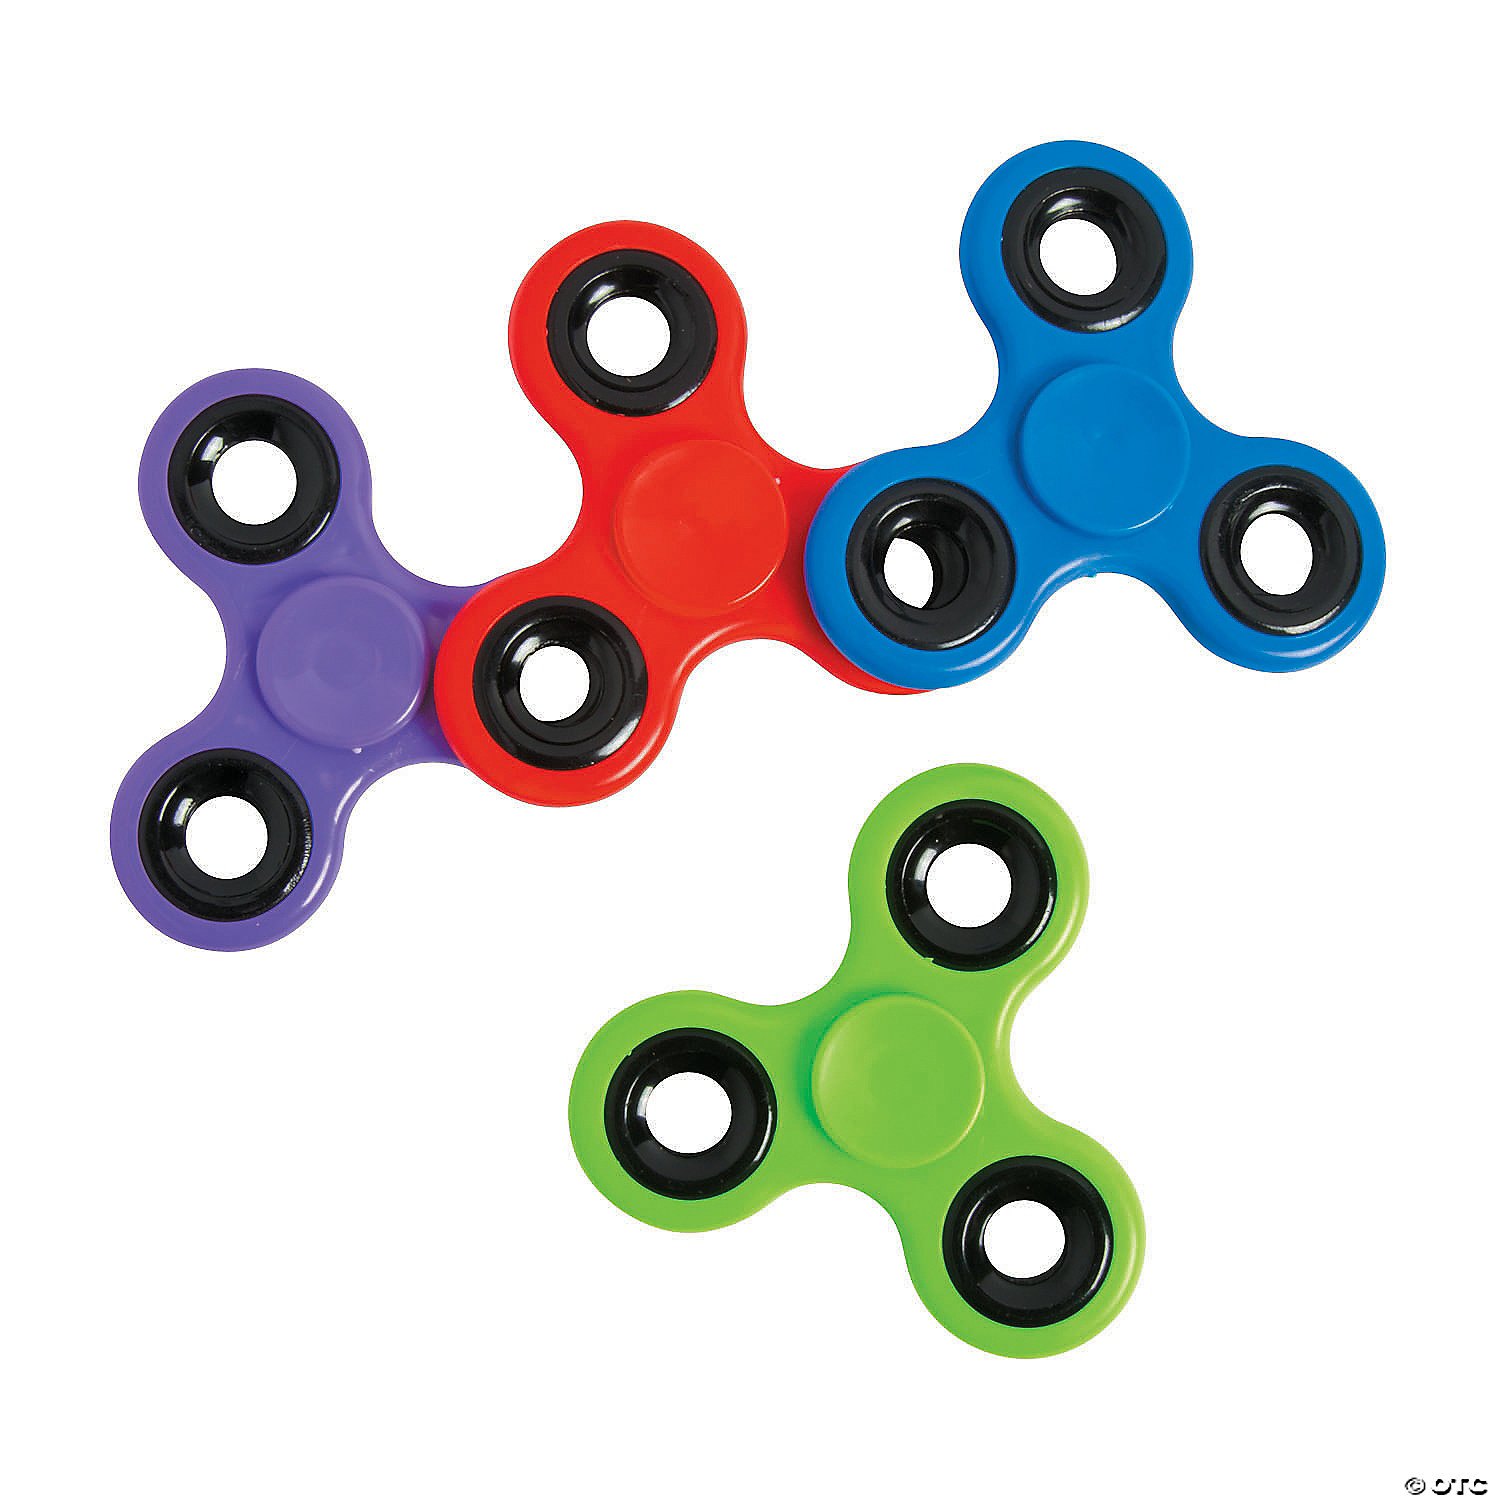 24 PC 3" Glow in the Dark Hand Spinner Kids Fun Party Favors Toys 